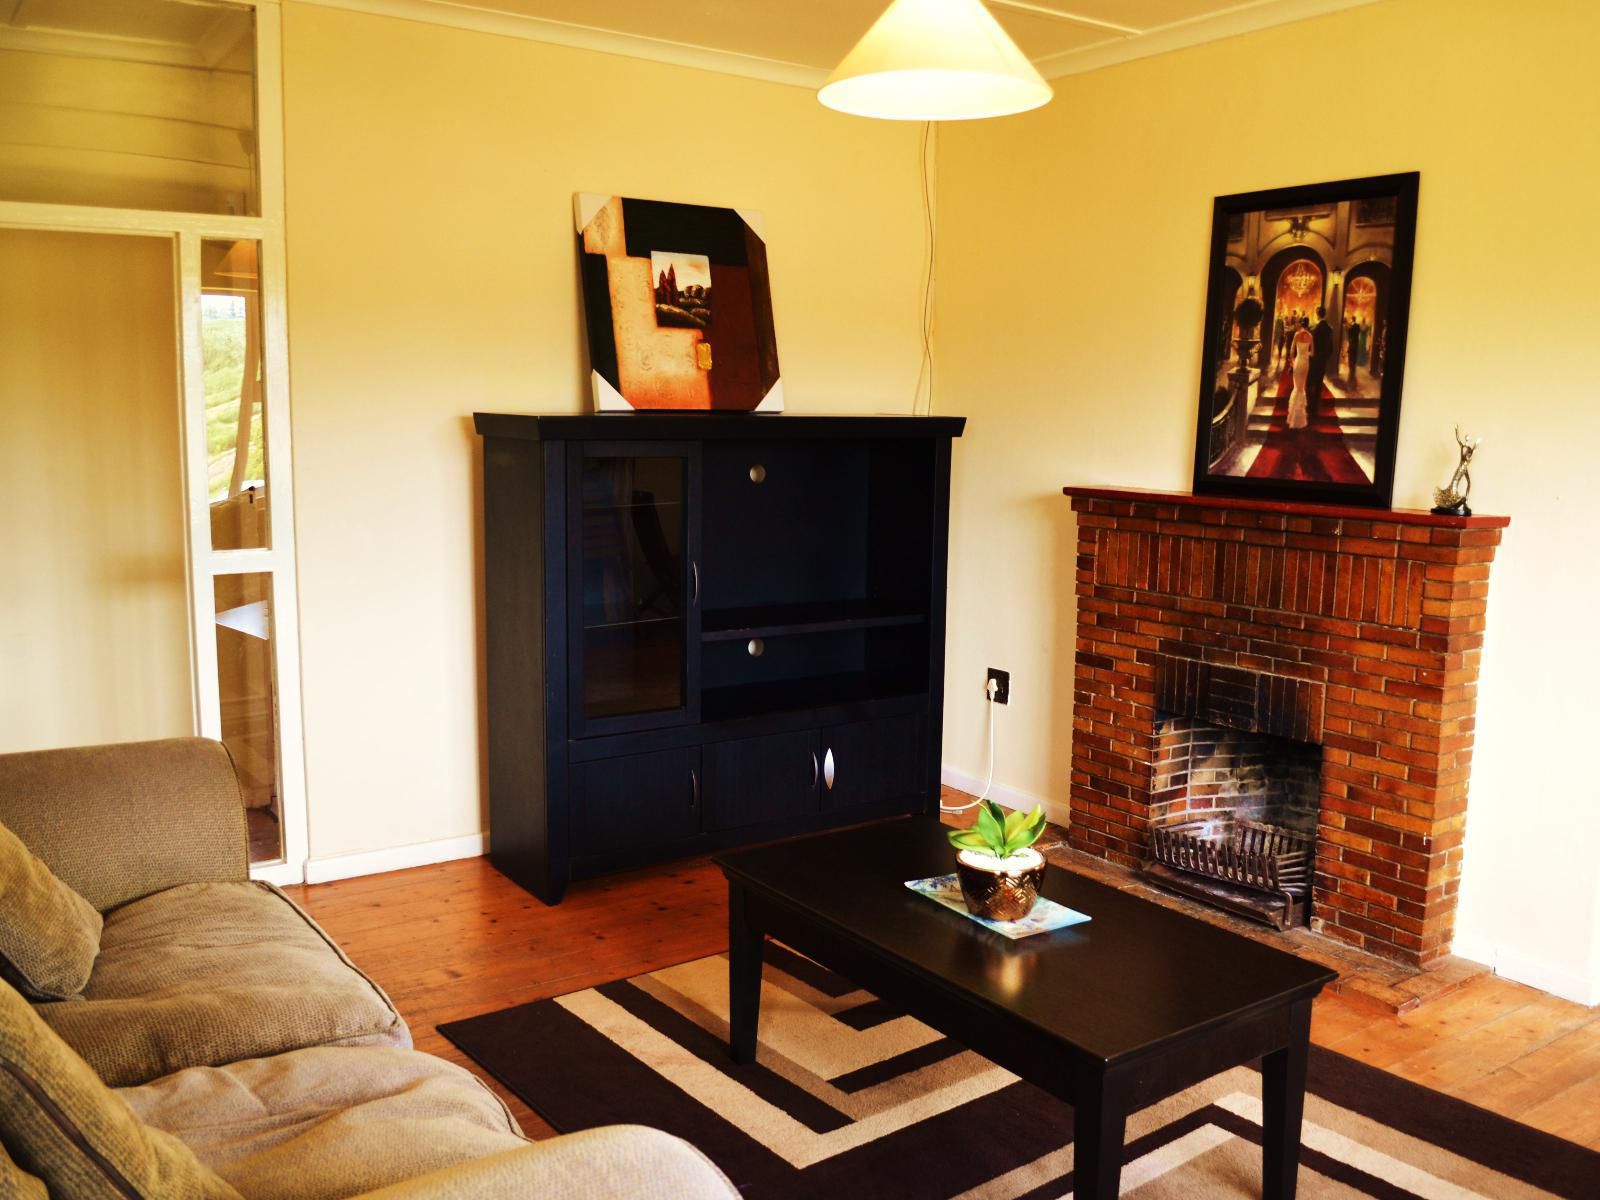 Inn On Highlands Elgin Western Cape South Africa Fire, Nature, Fireplace, Living Room